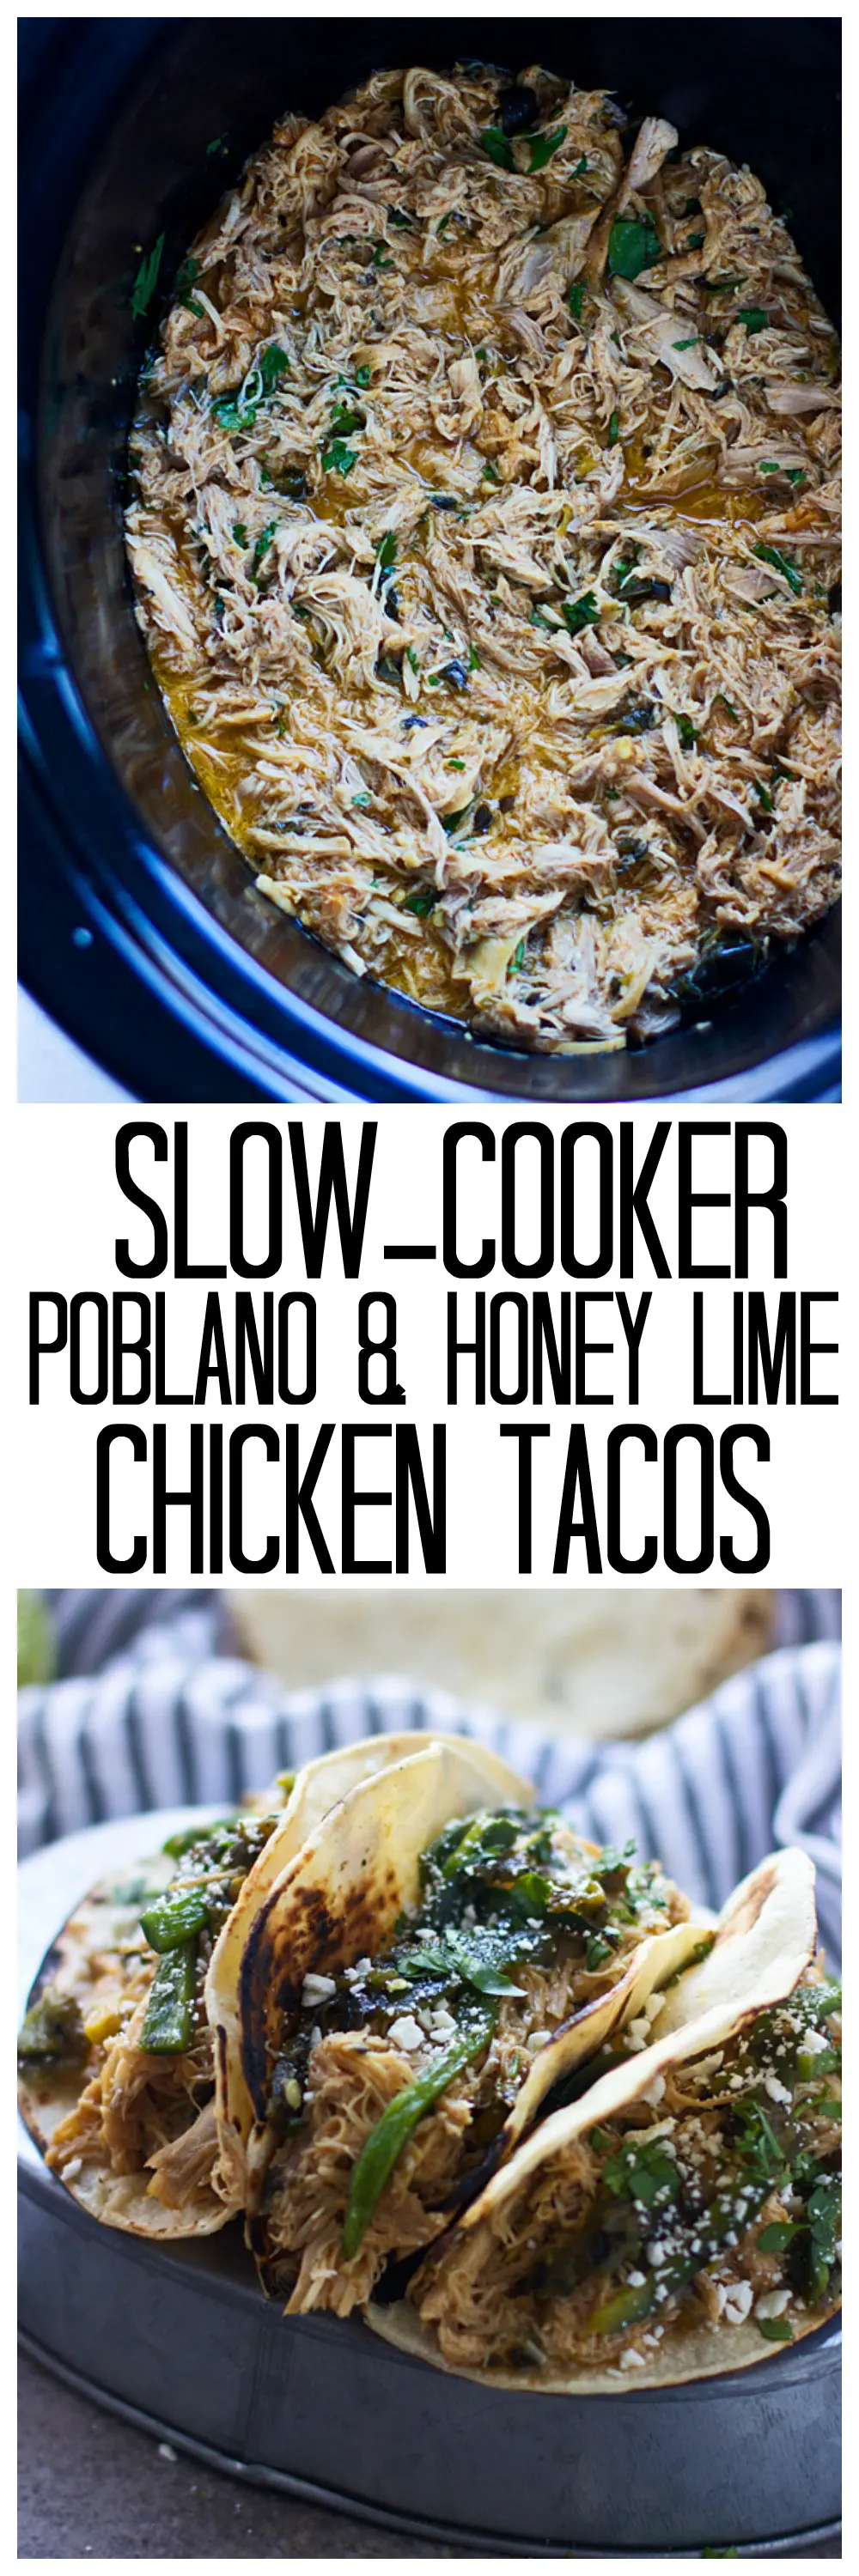 Slow-Cooker Poblano and Honey Lime Chicken Tacos - Sweet and spicy shredded chicken, topped with roasted poblano peppers, cilantro and cotija cheese! Easy, healthy and delicious!